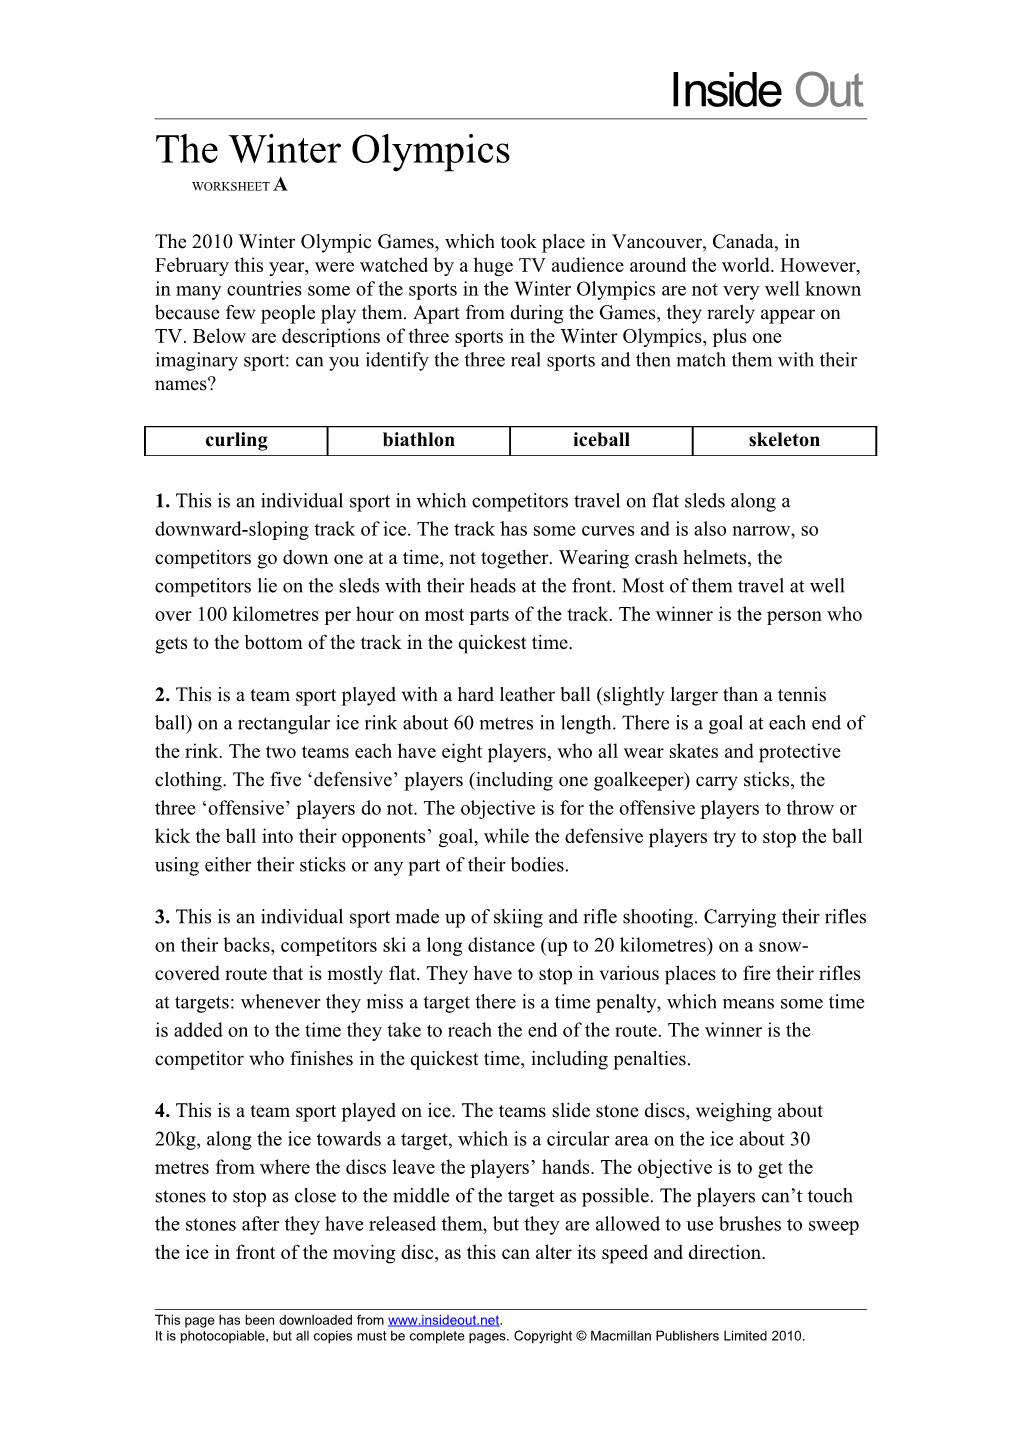 The Winter Olympics WORKSHEET A